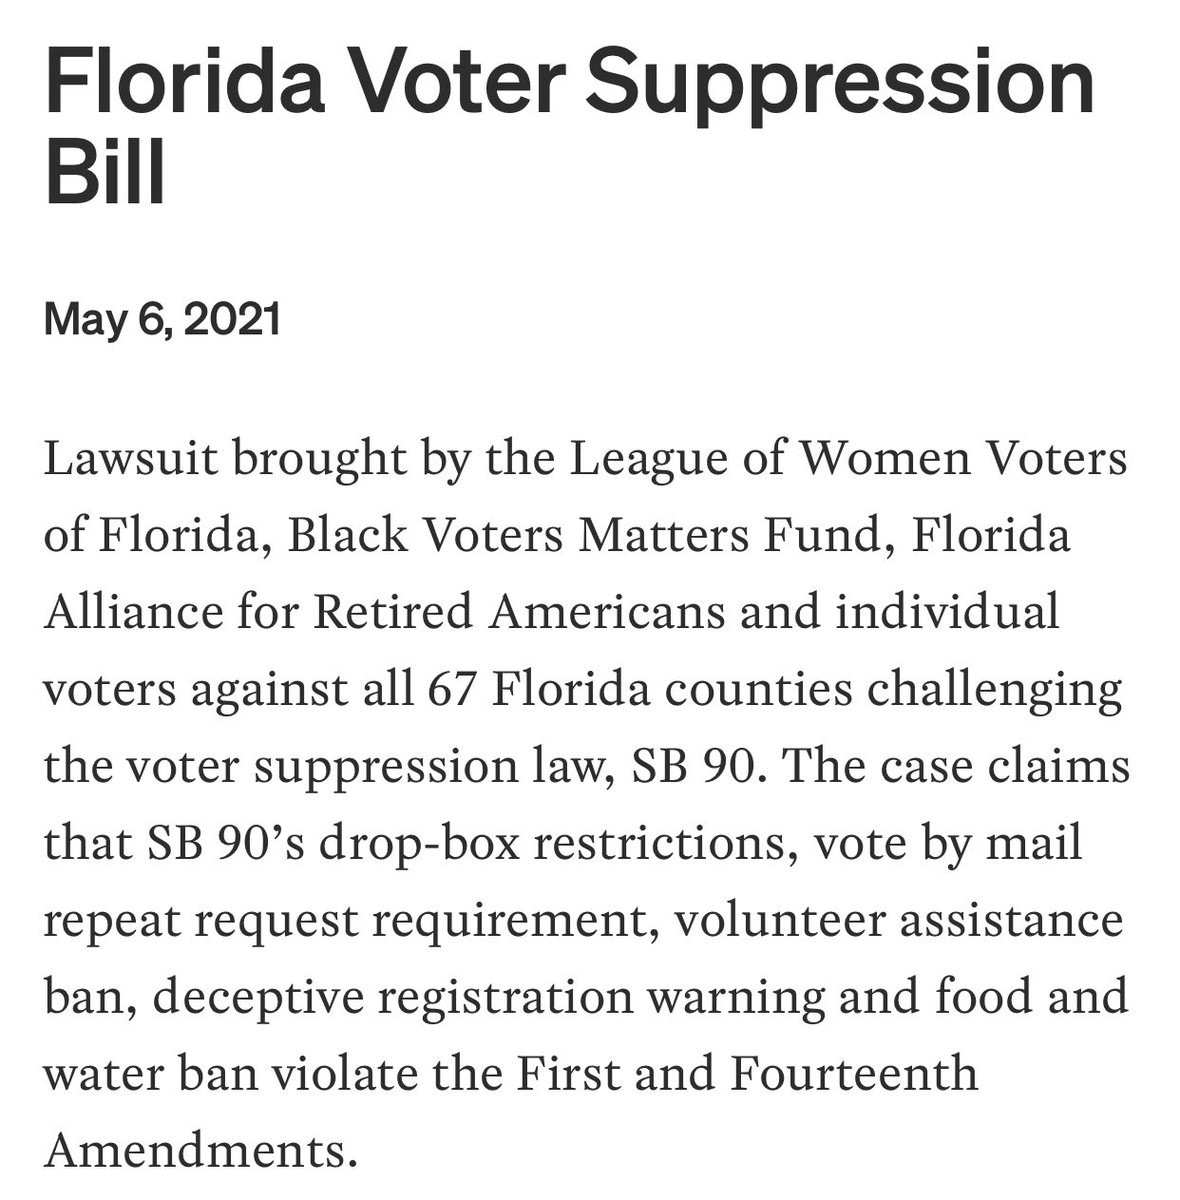 Disgraced Democrat lawyers have already begun filing their (incredibly thin) lawsuits, focused on misrepresenting these provisions. Drop box changes  Requiring a request for mail ballots  Limiting ballot harvesting  “Food and water ban” https://www.democracydocket.com/cases/florida-voter-suppression-bill/